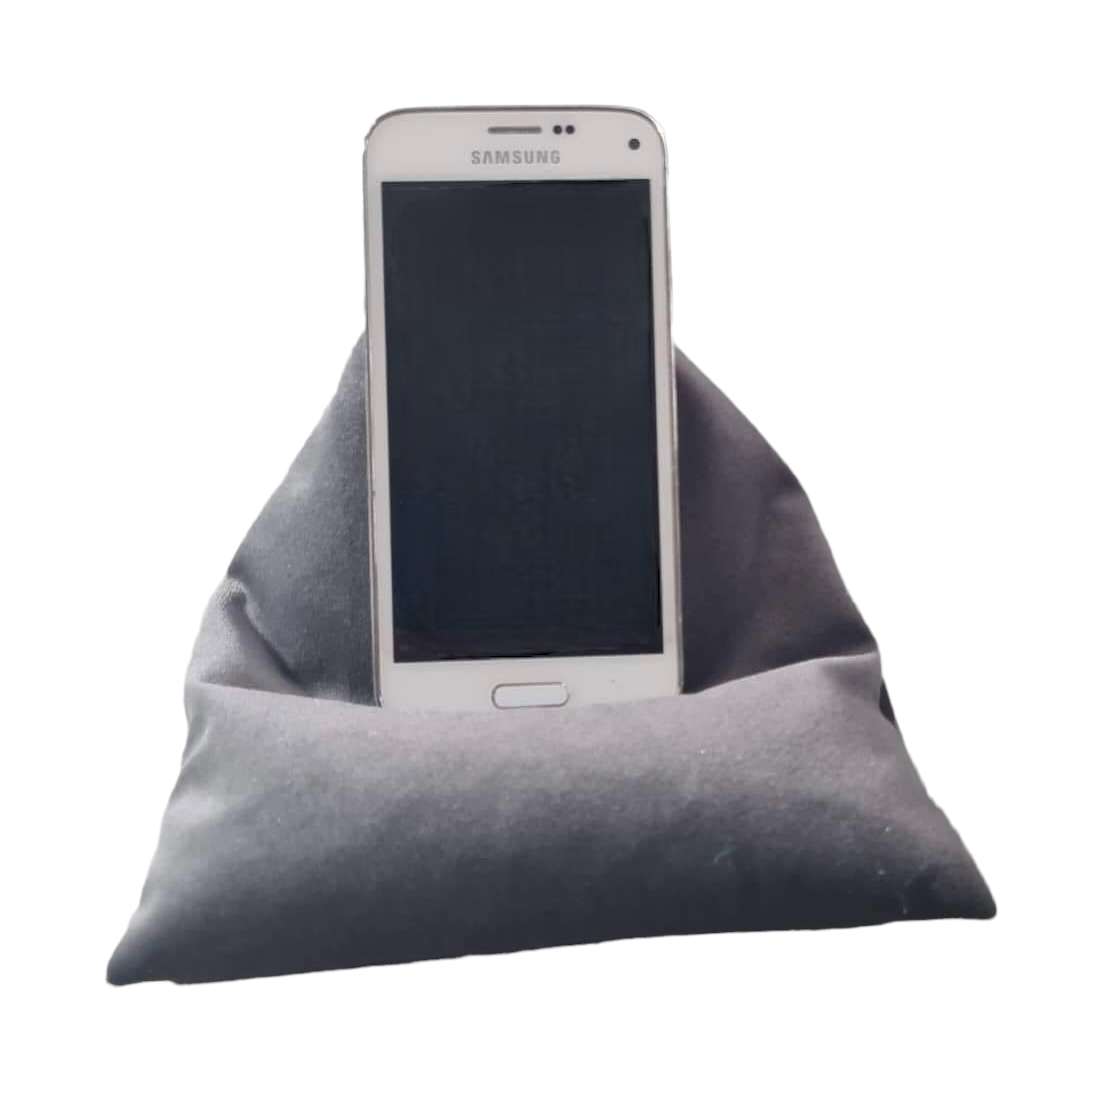 Lazy Phone Pillow Accessibility Equipment SPIRIT SPARKPLUGS BY DESIGN   